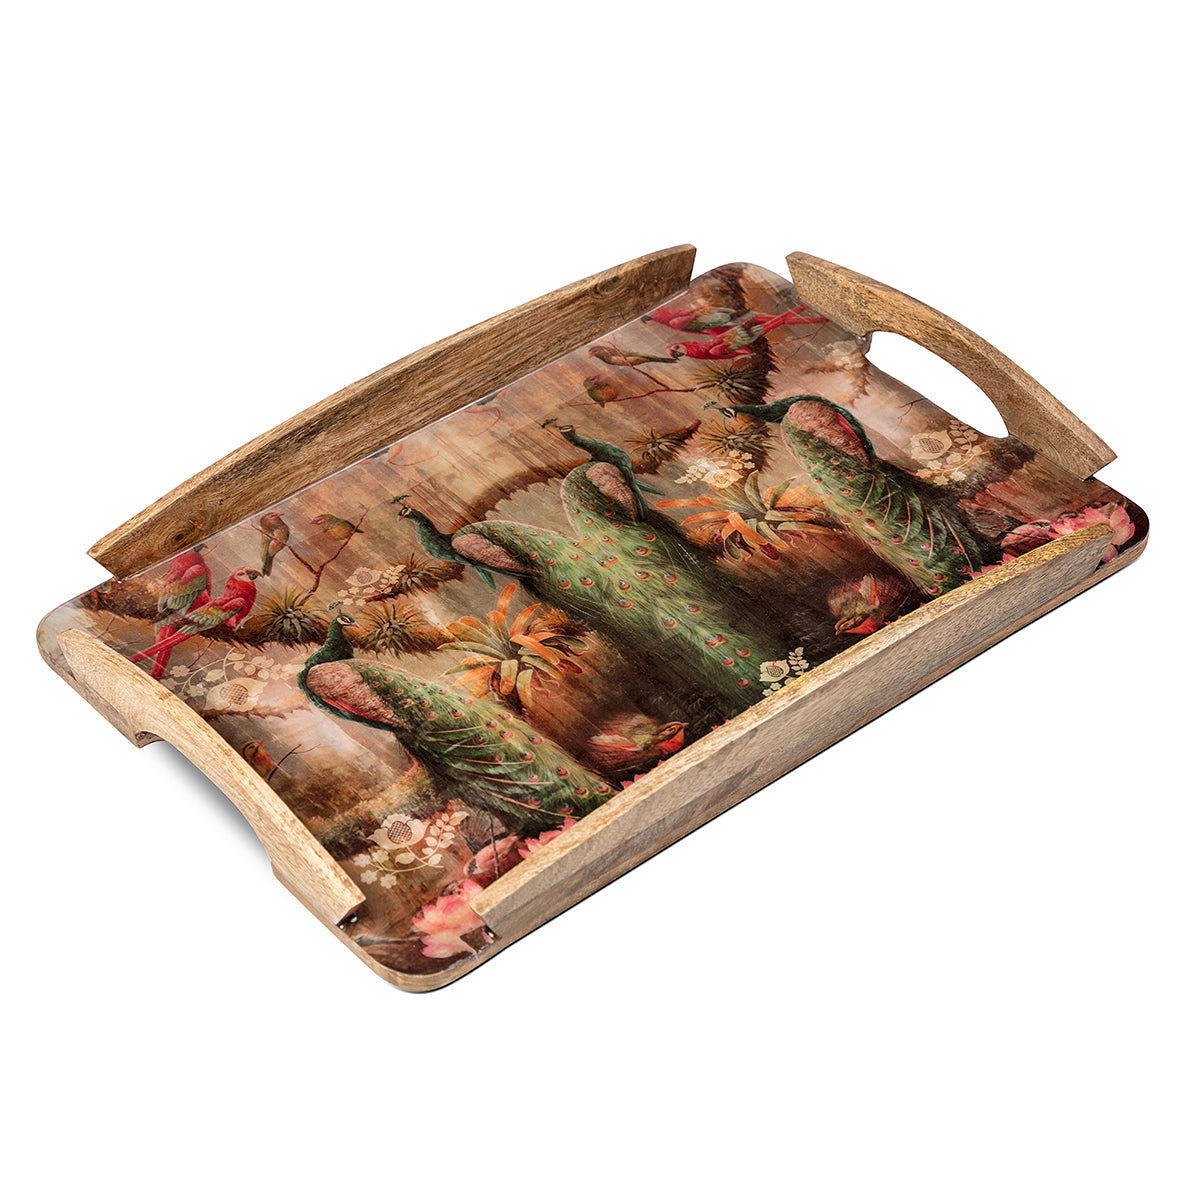 Peacock Wooden Trays